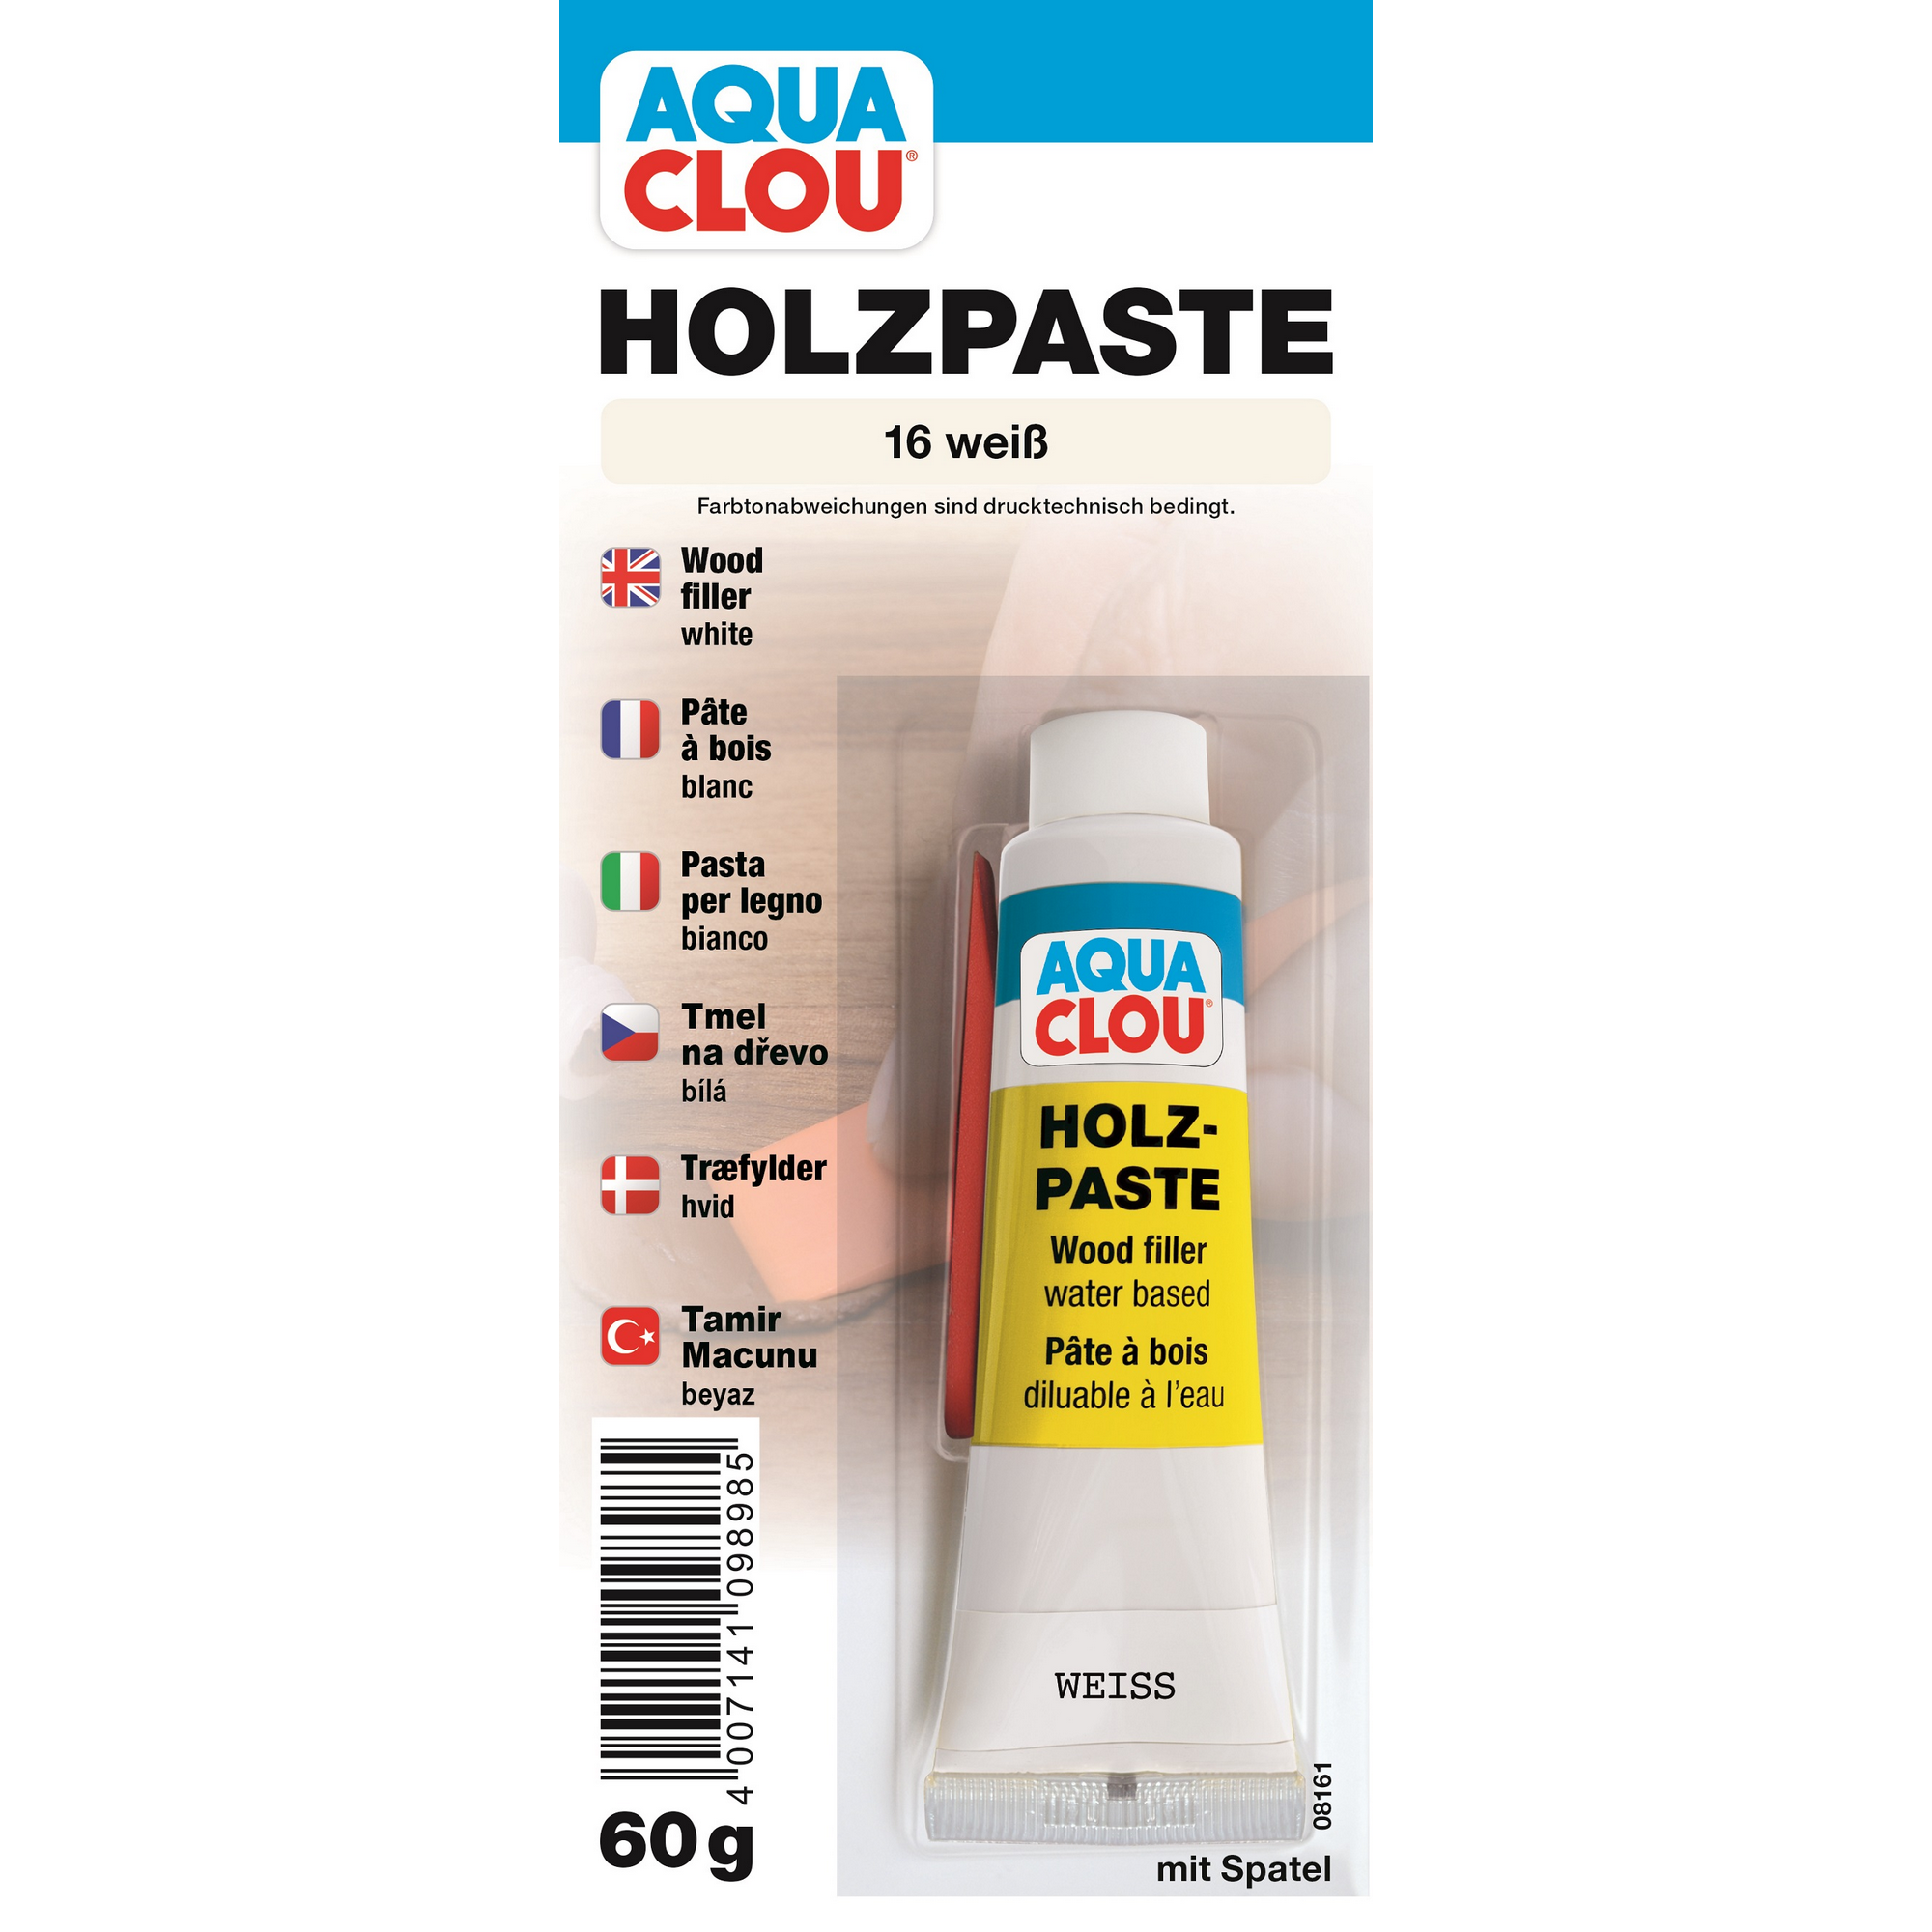 Holzpaste "Aqua" weiß 50 g + product picture